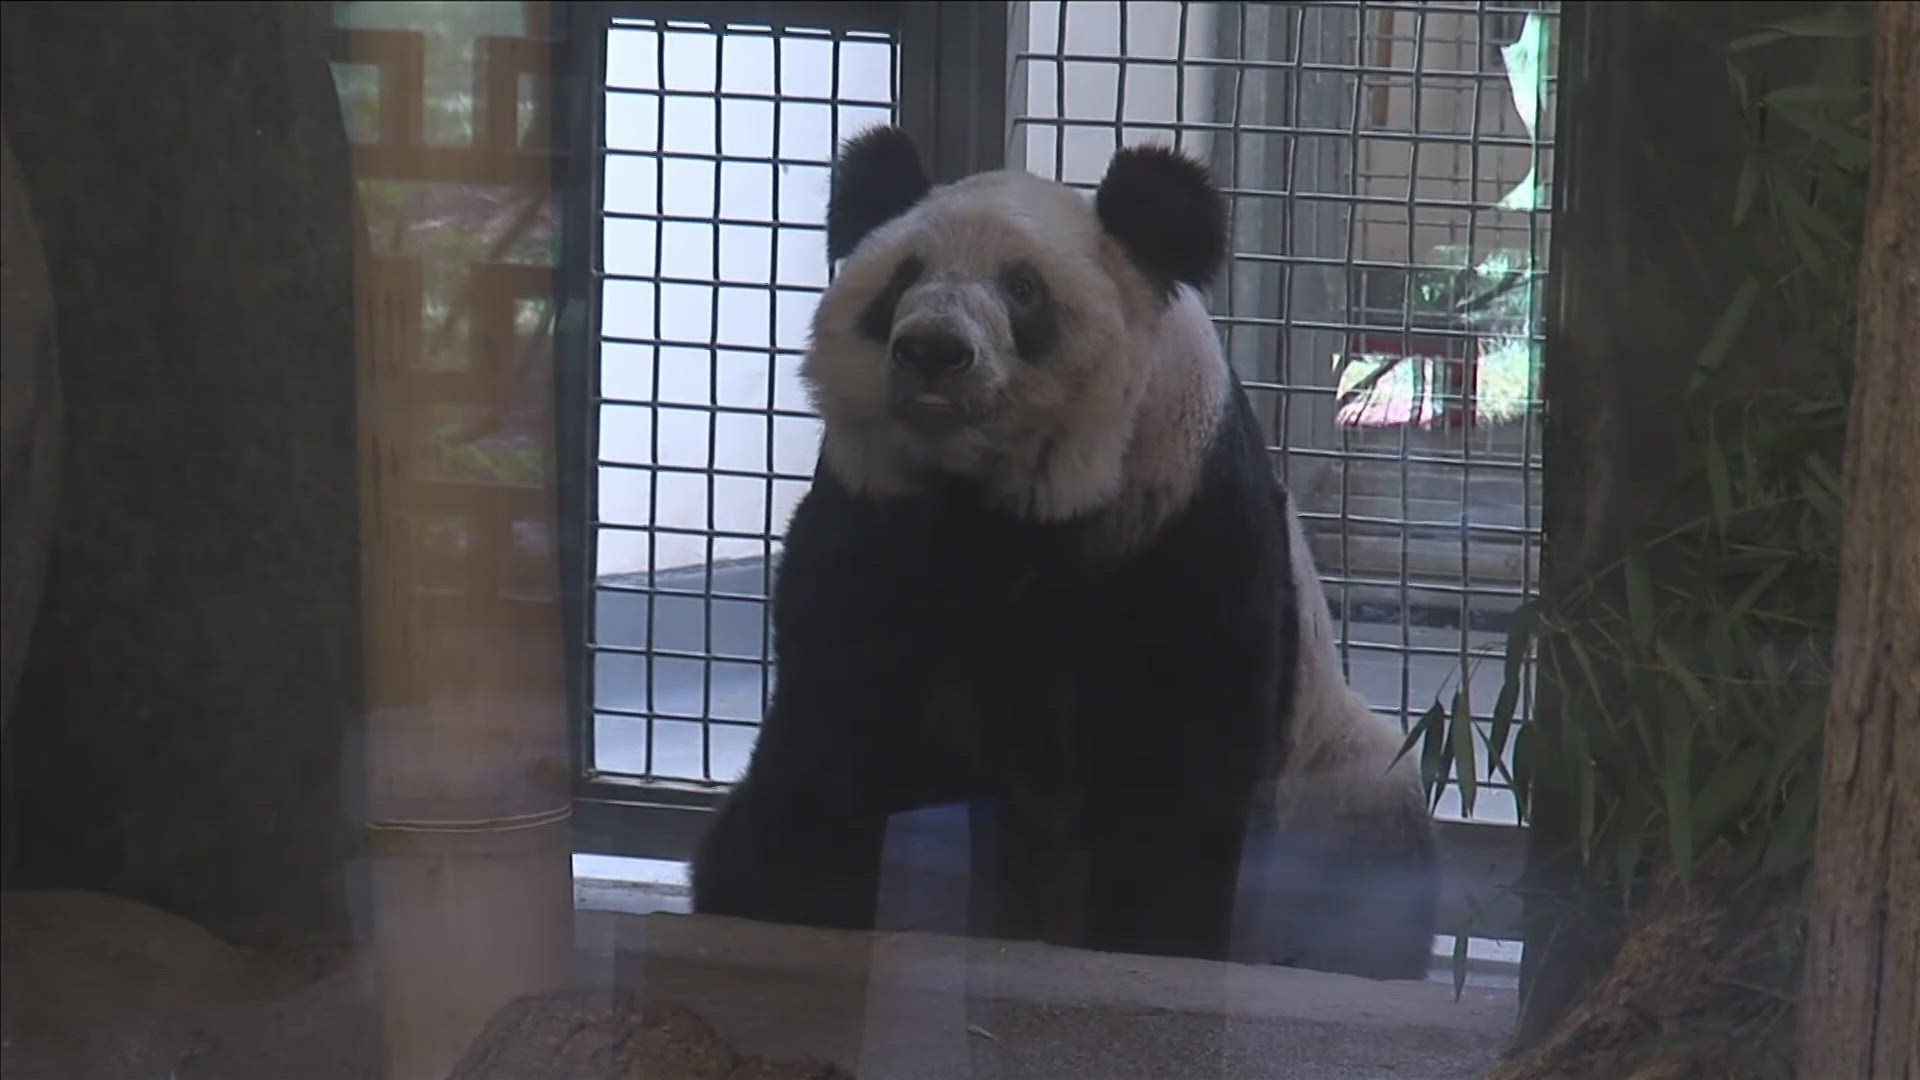 The zoo said the giant panda began her journey back to her homeland Wednesday.